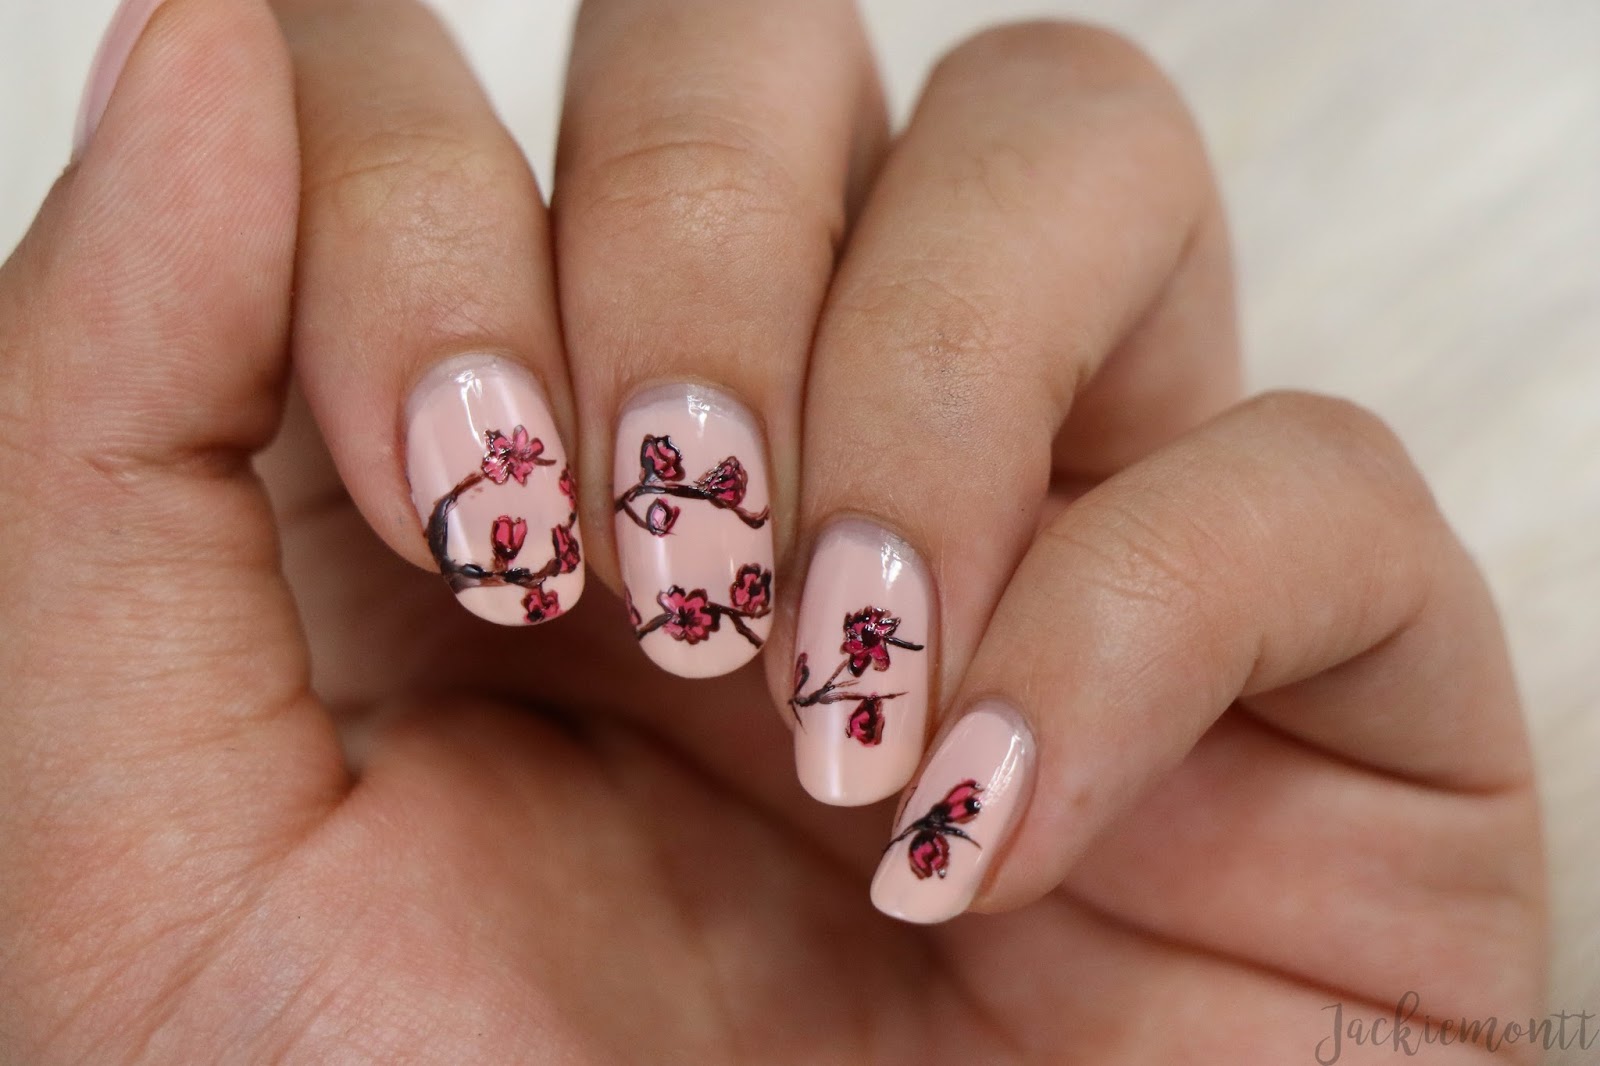 1. Japanese Cherry Blossom Nail Art for Short Nails - wide 3